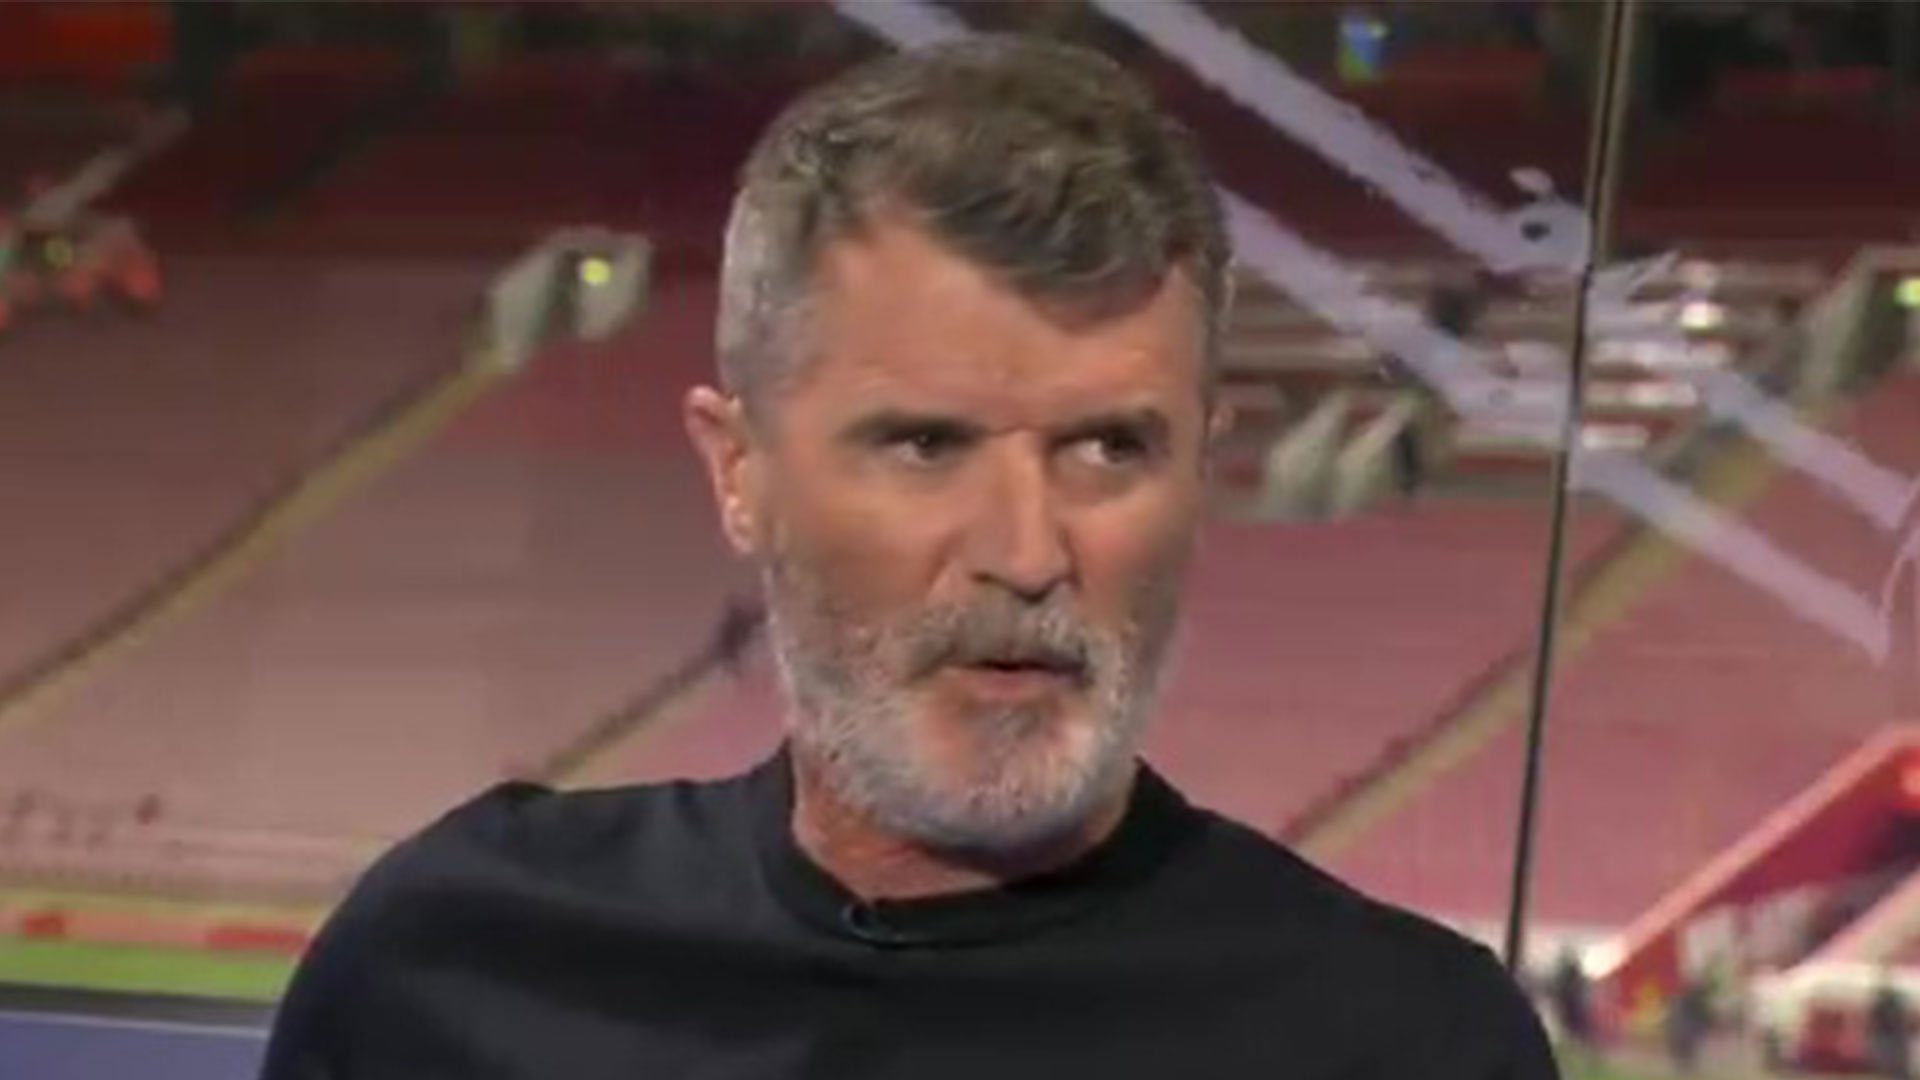 Man Utd fans hail Roy Keane for moment he 'forgot he's a paid pundit' live on Sky Sports